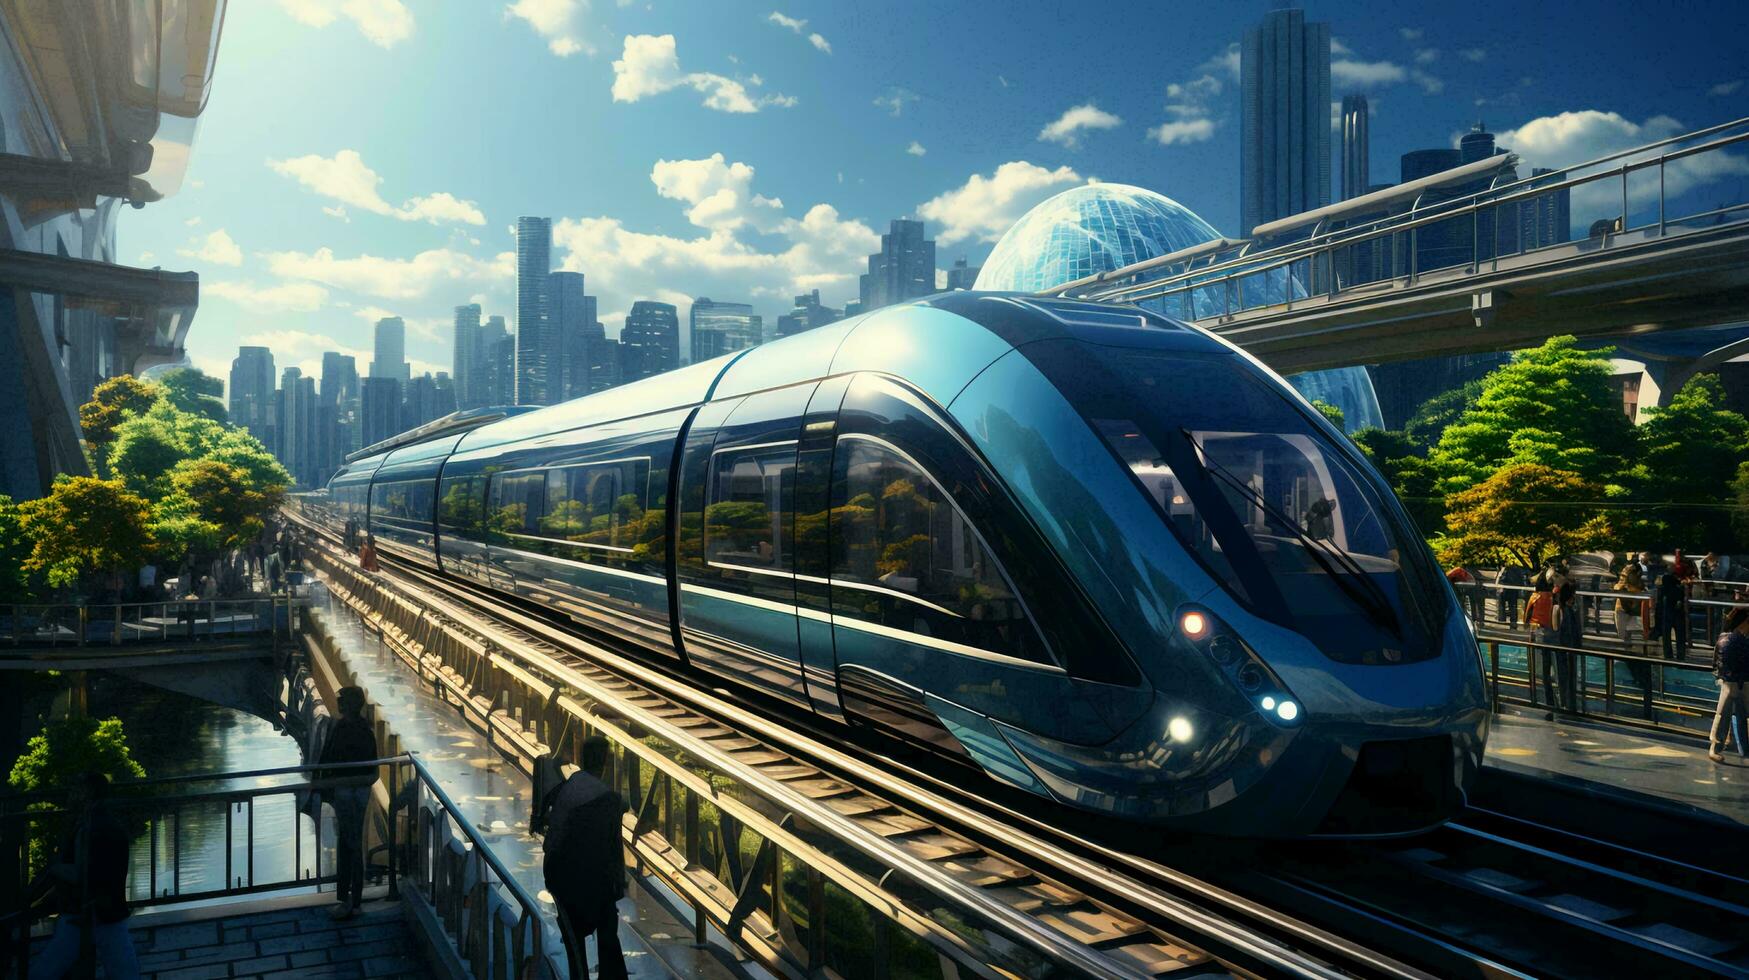 High-speed train on the background of a futuristic city photo